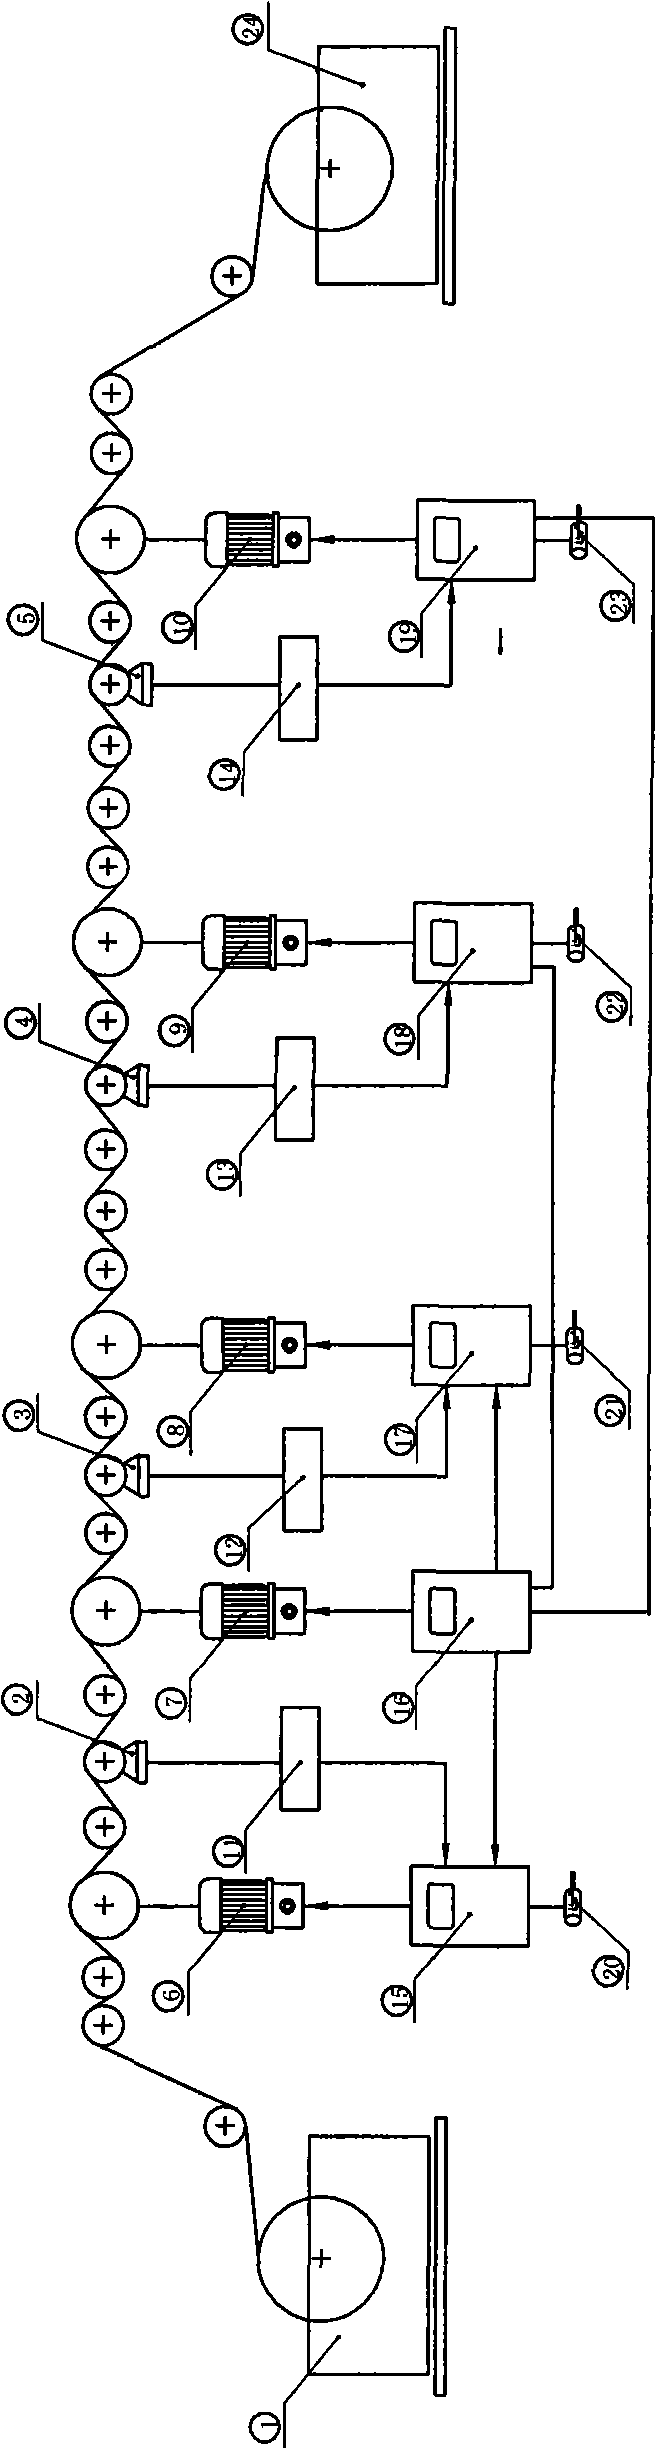 Tension control system